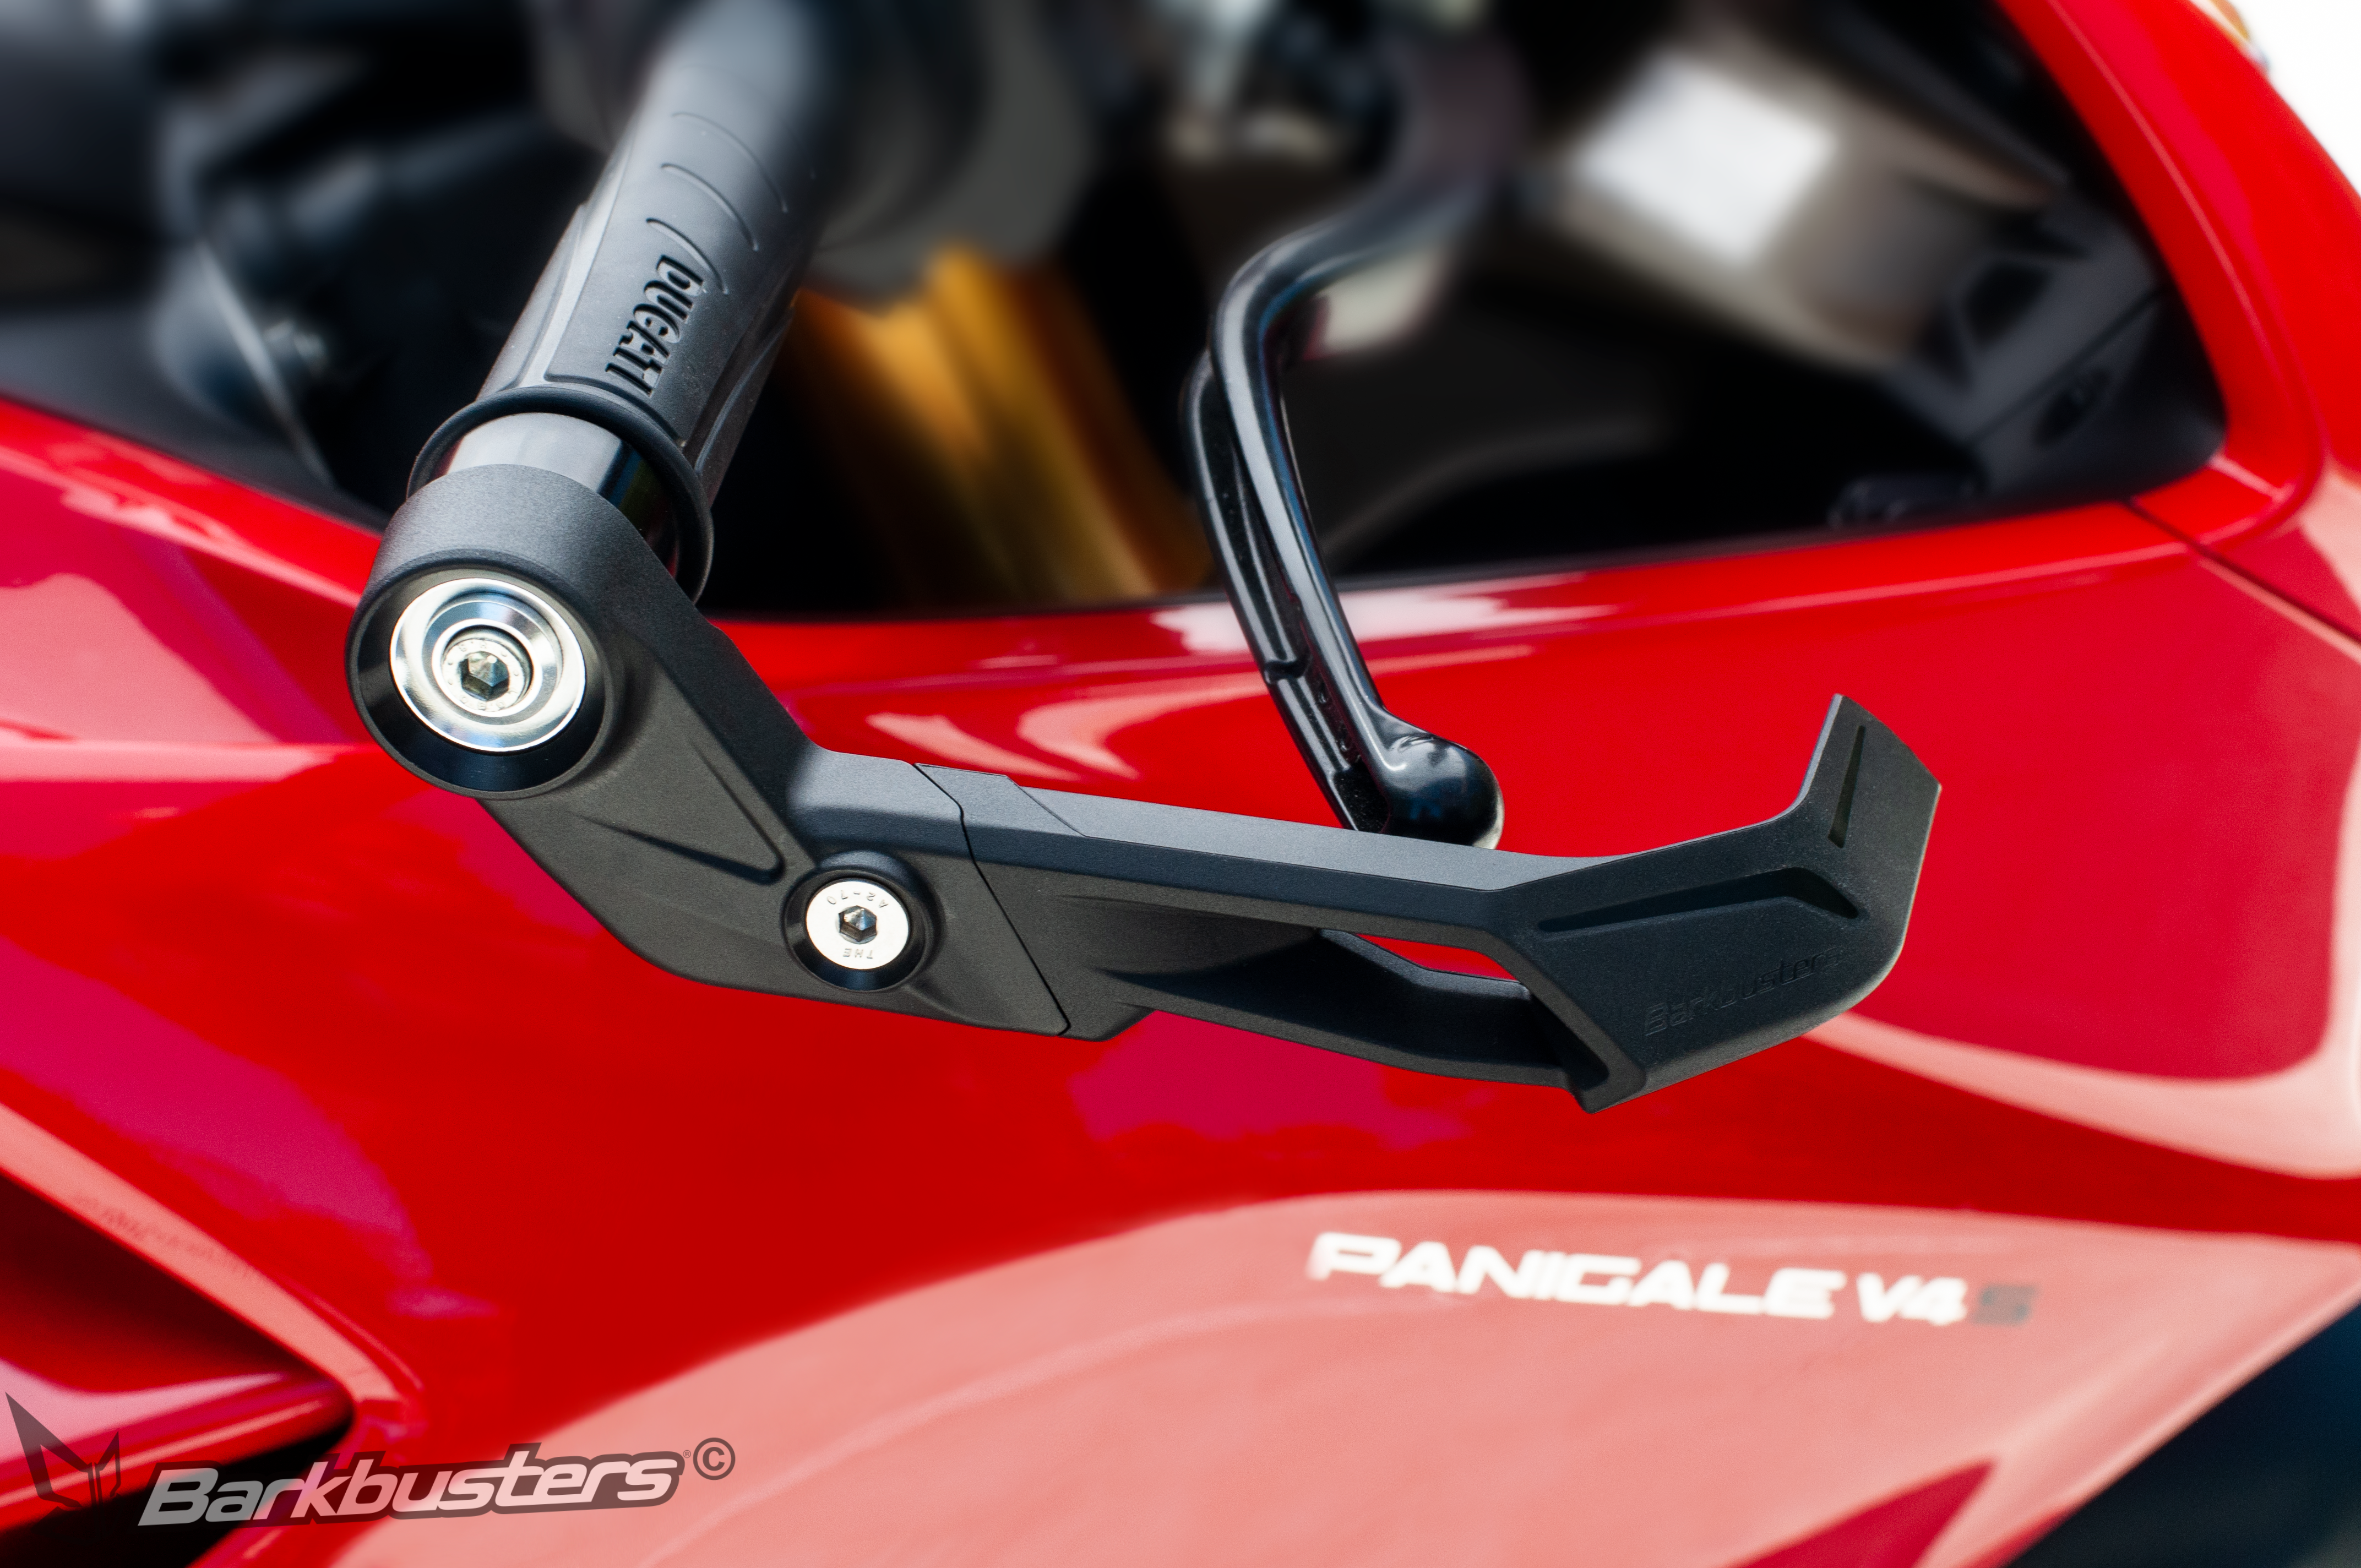 BARKBUSTERS AERO-GP Lever Protector (Code: AGP-001) fitted to DUCATI Panigale V4S 